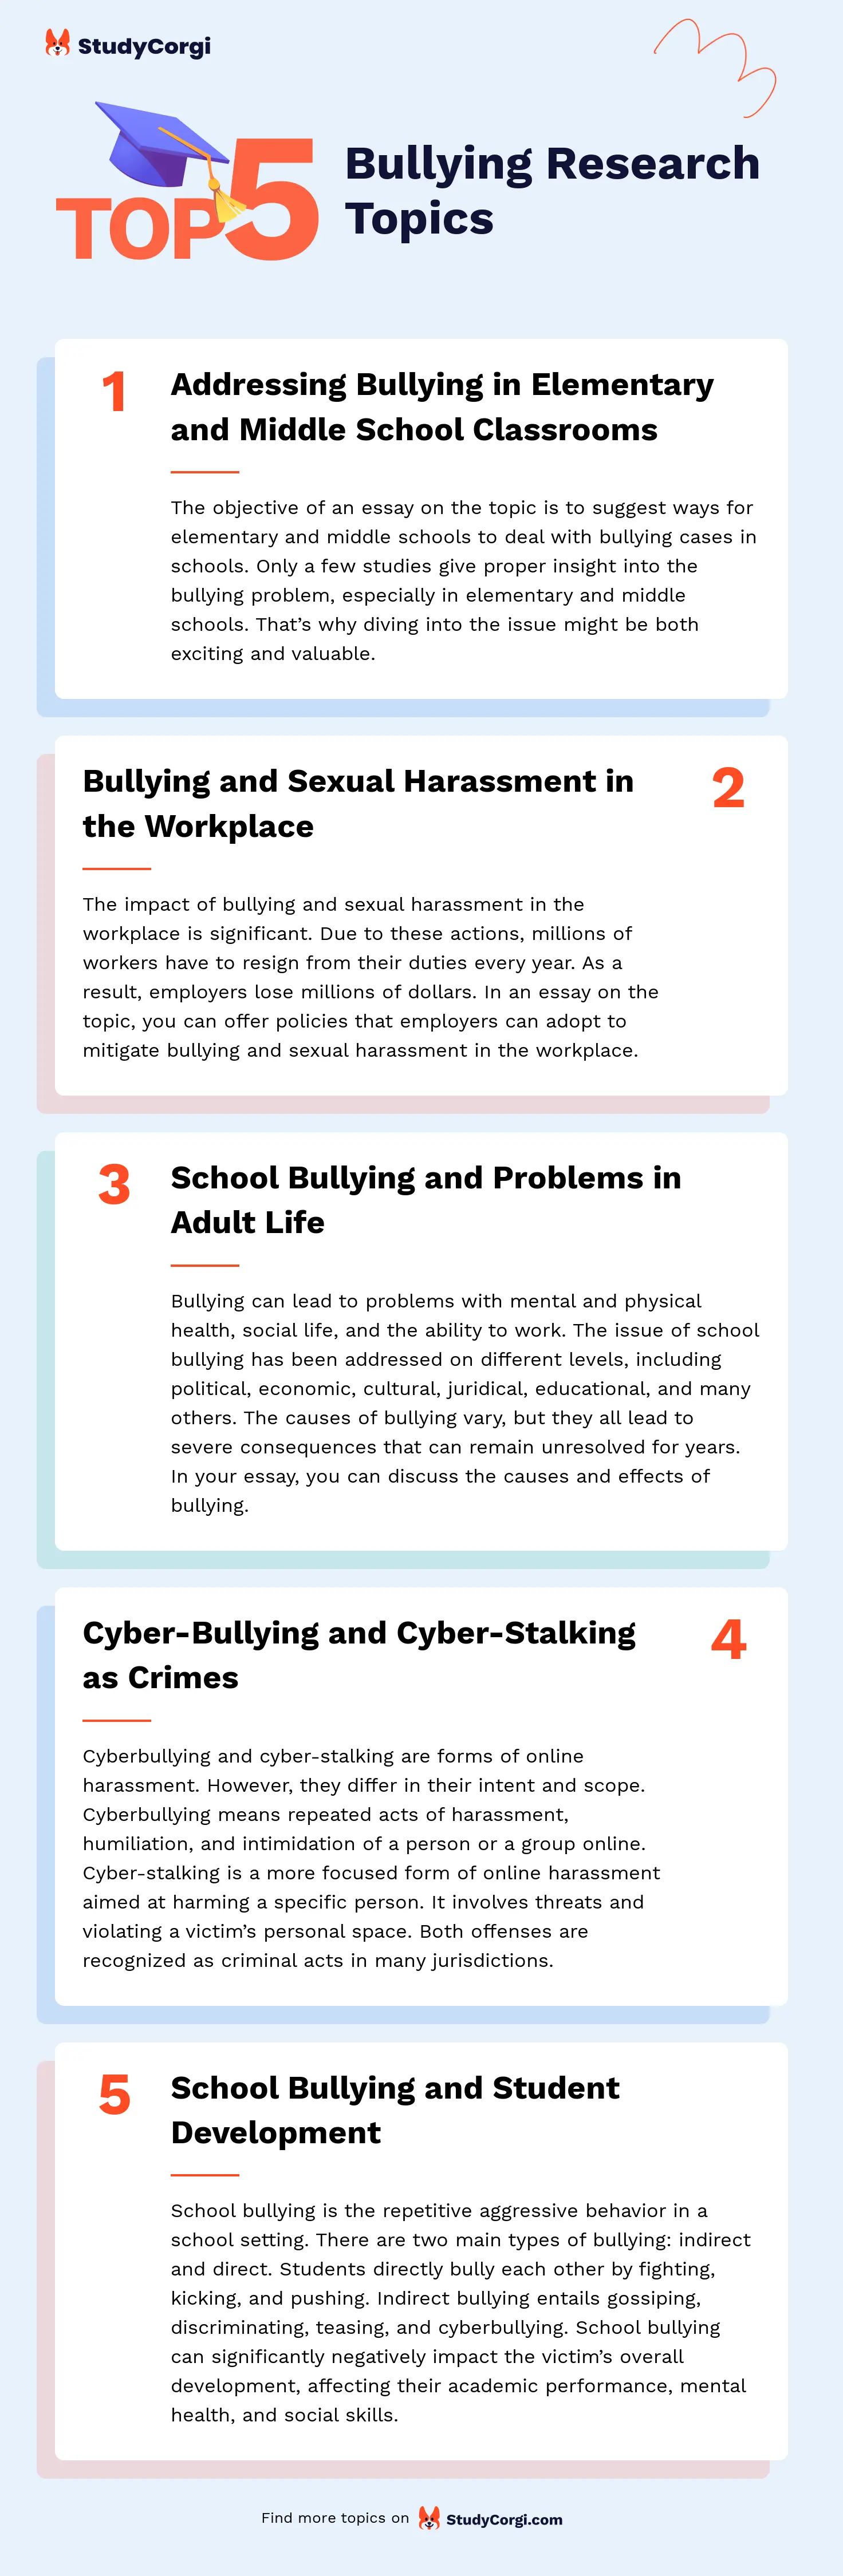 TOP-5 Bullying Research Topics